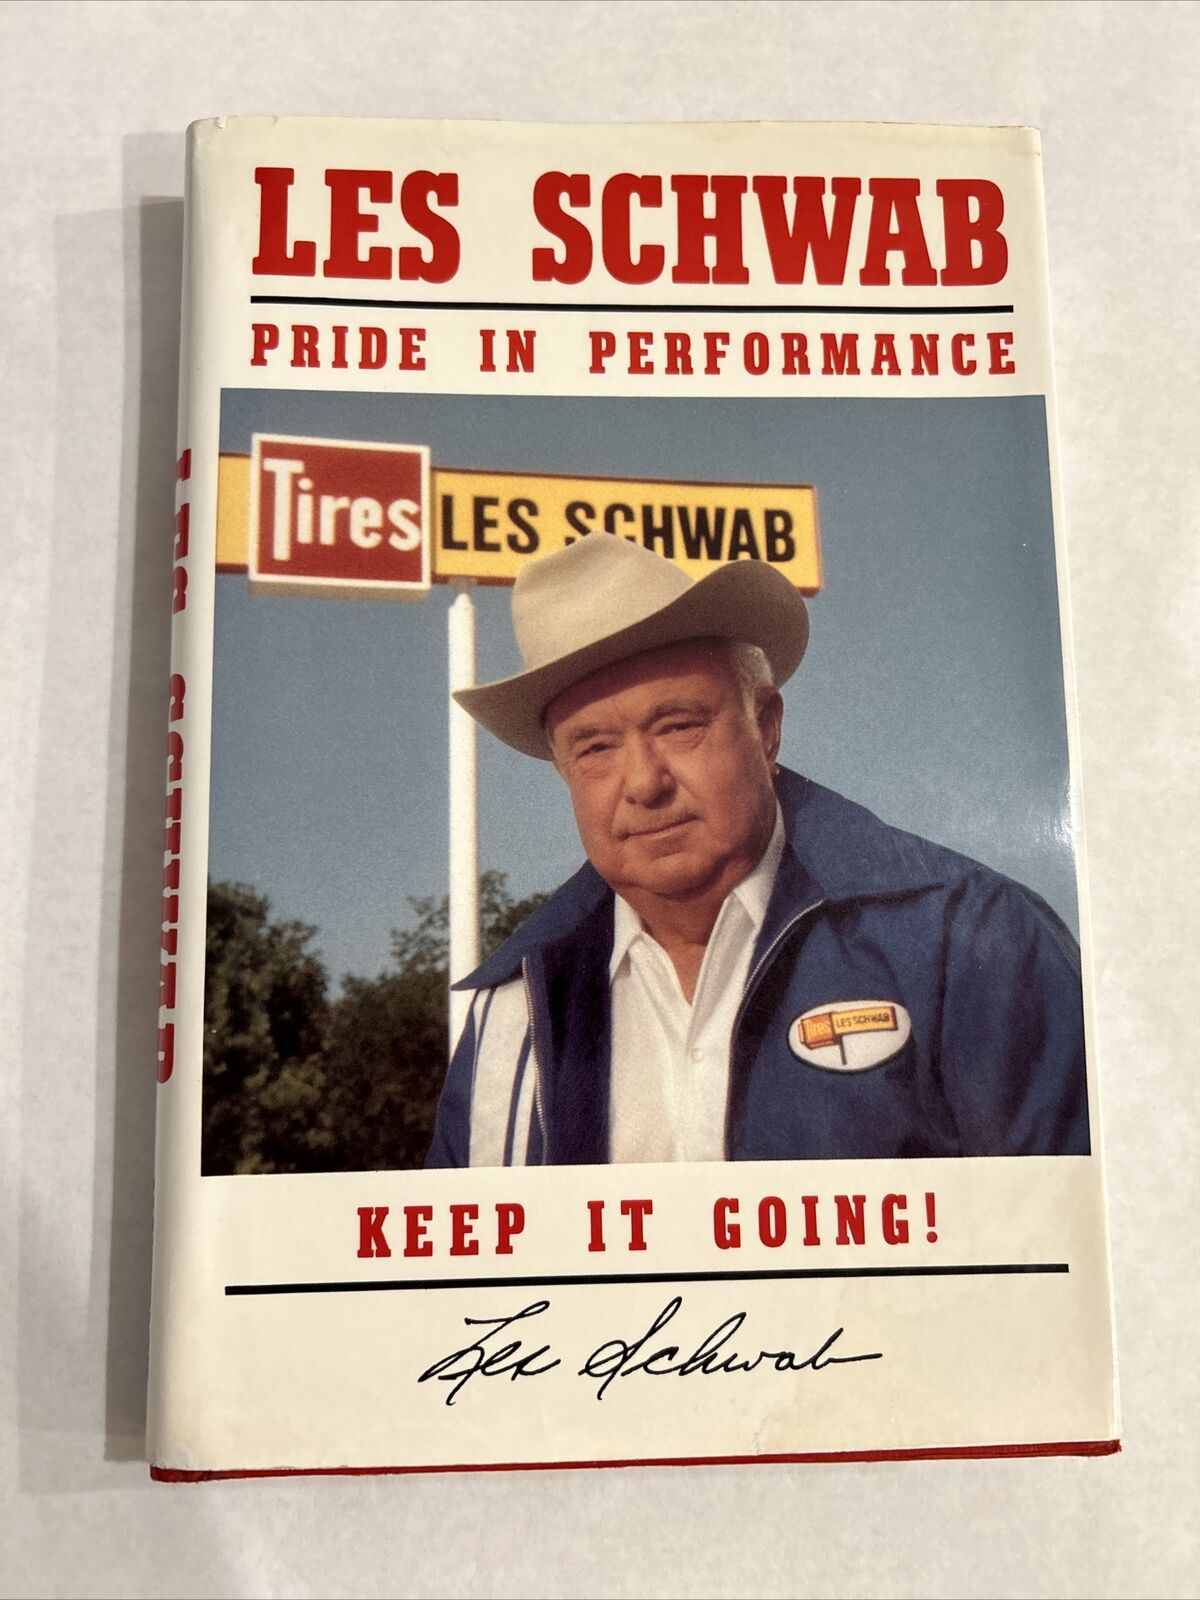 Les Schwab Pride in Performance Hard Cover, Signed Book, VG Condition